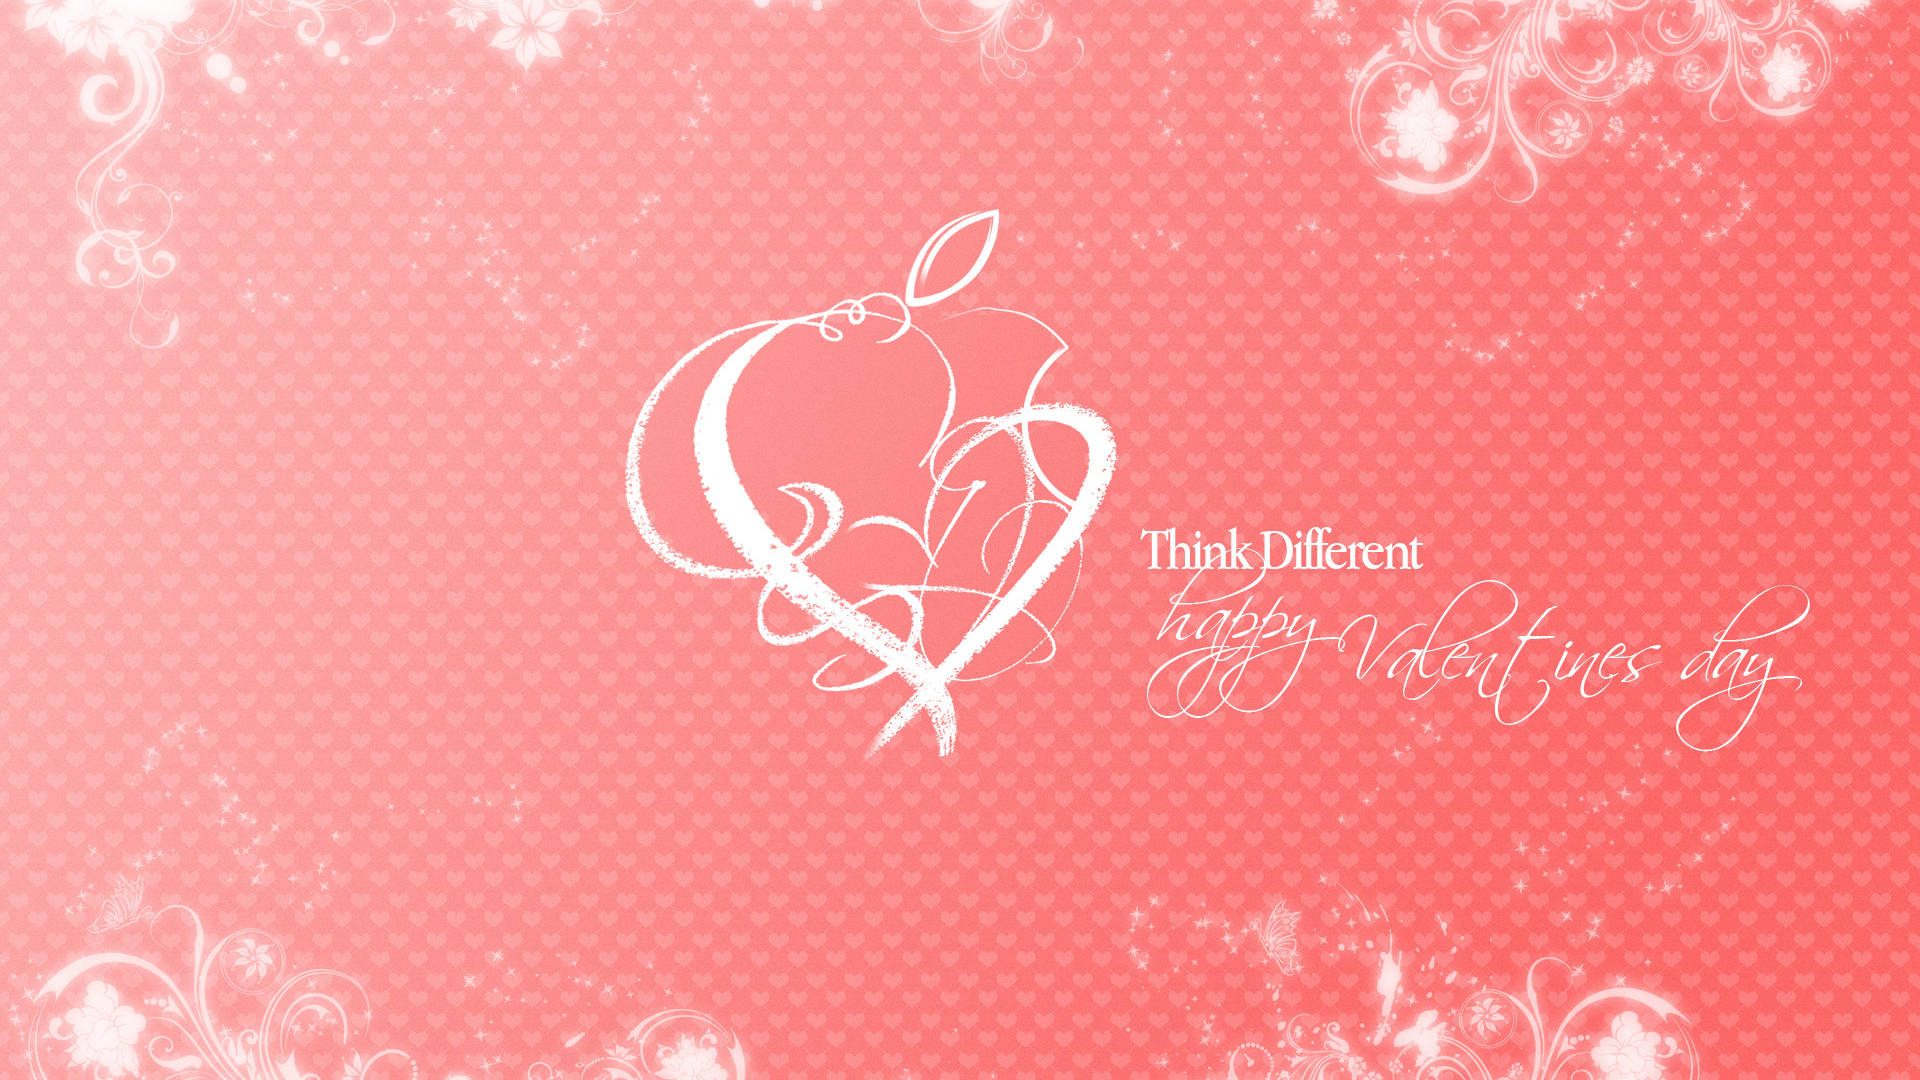 Image  Spread love and joy in February with Valentines Day Wallpaper